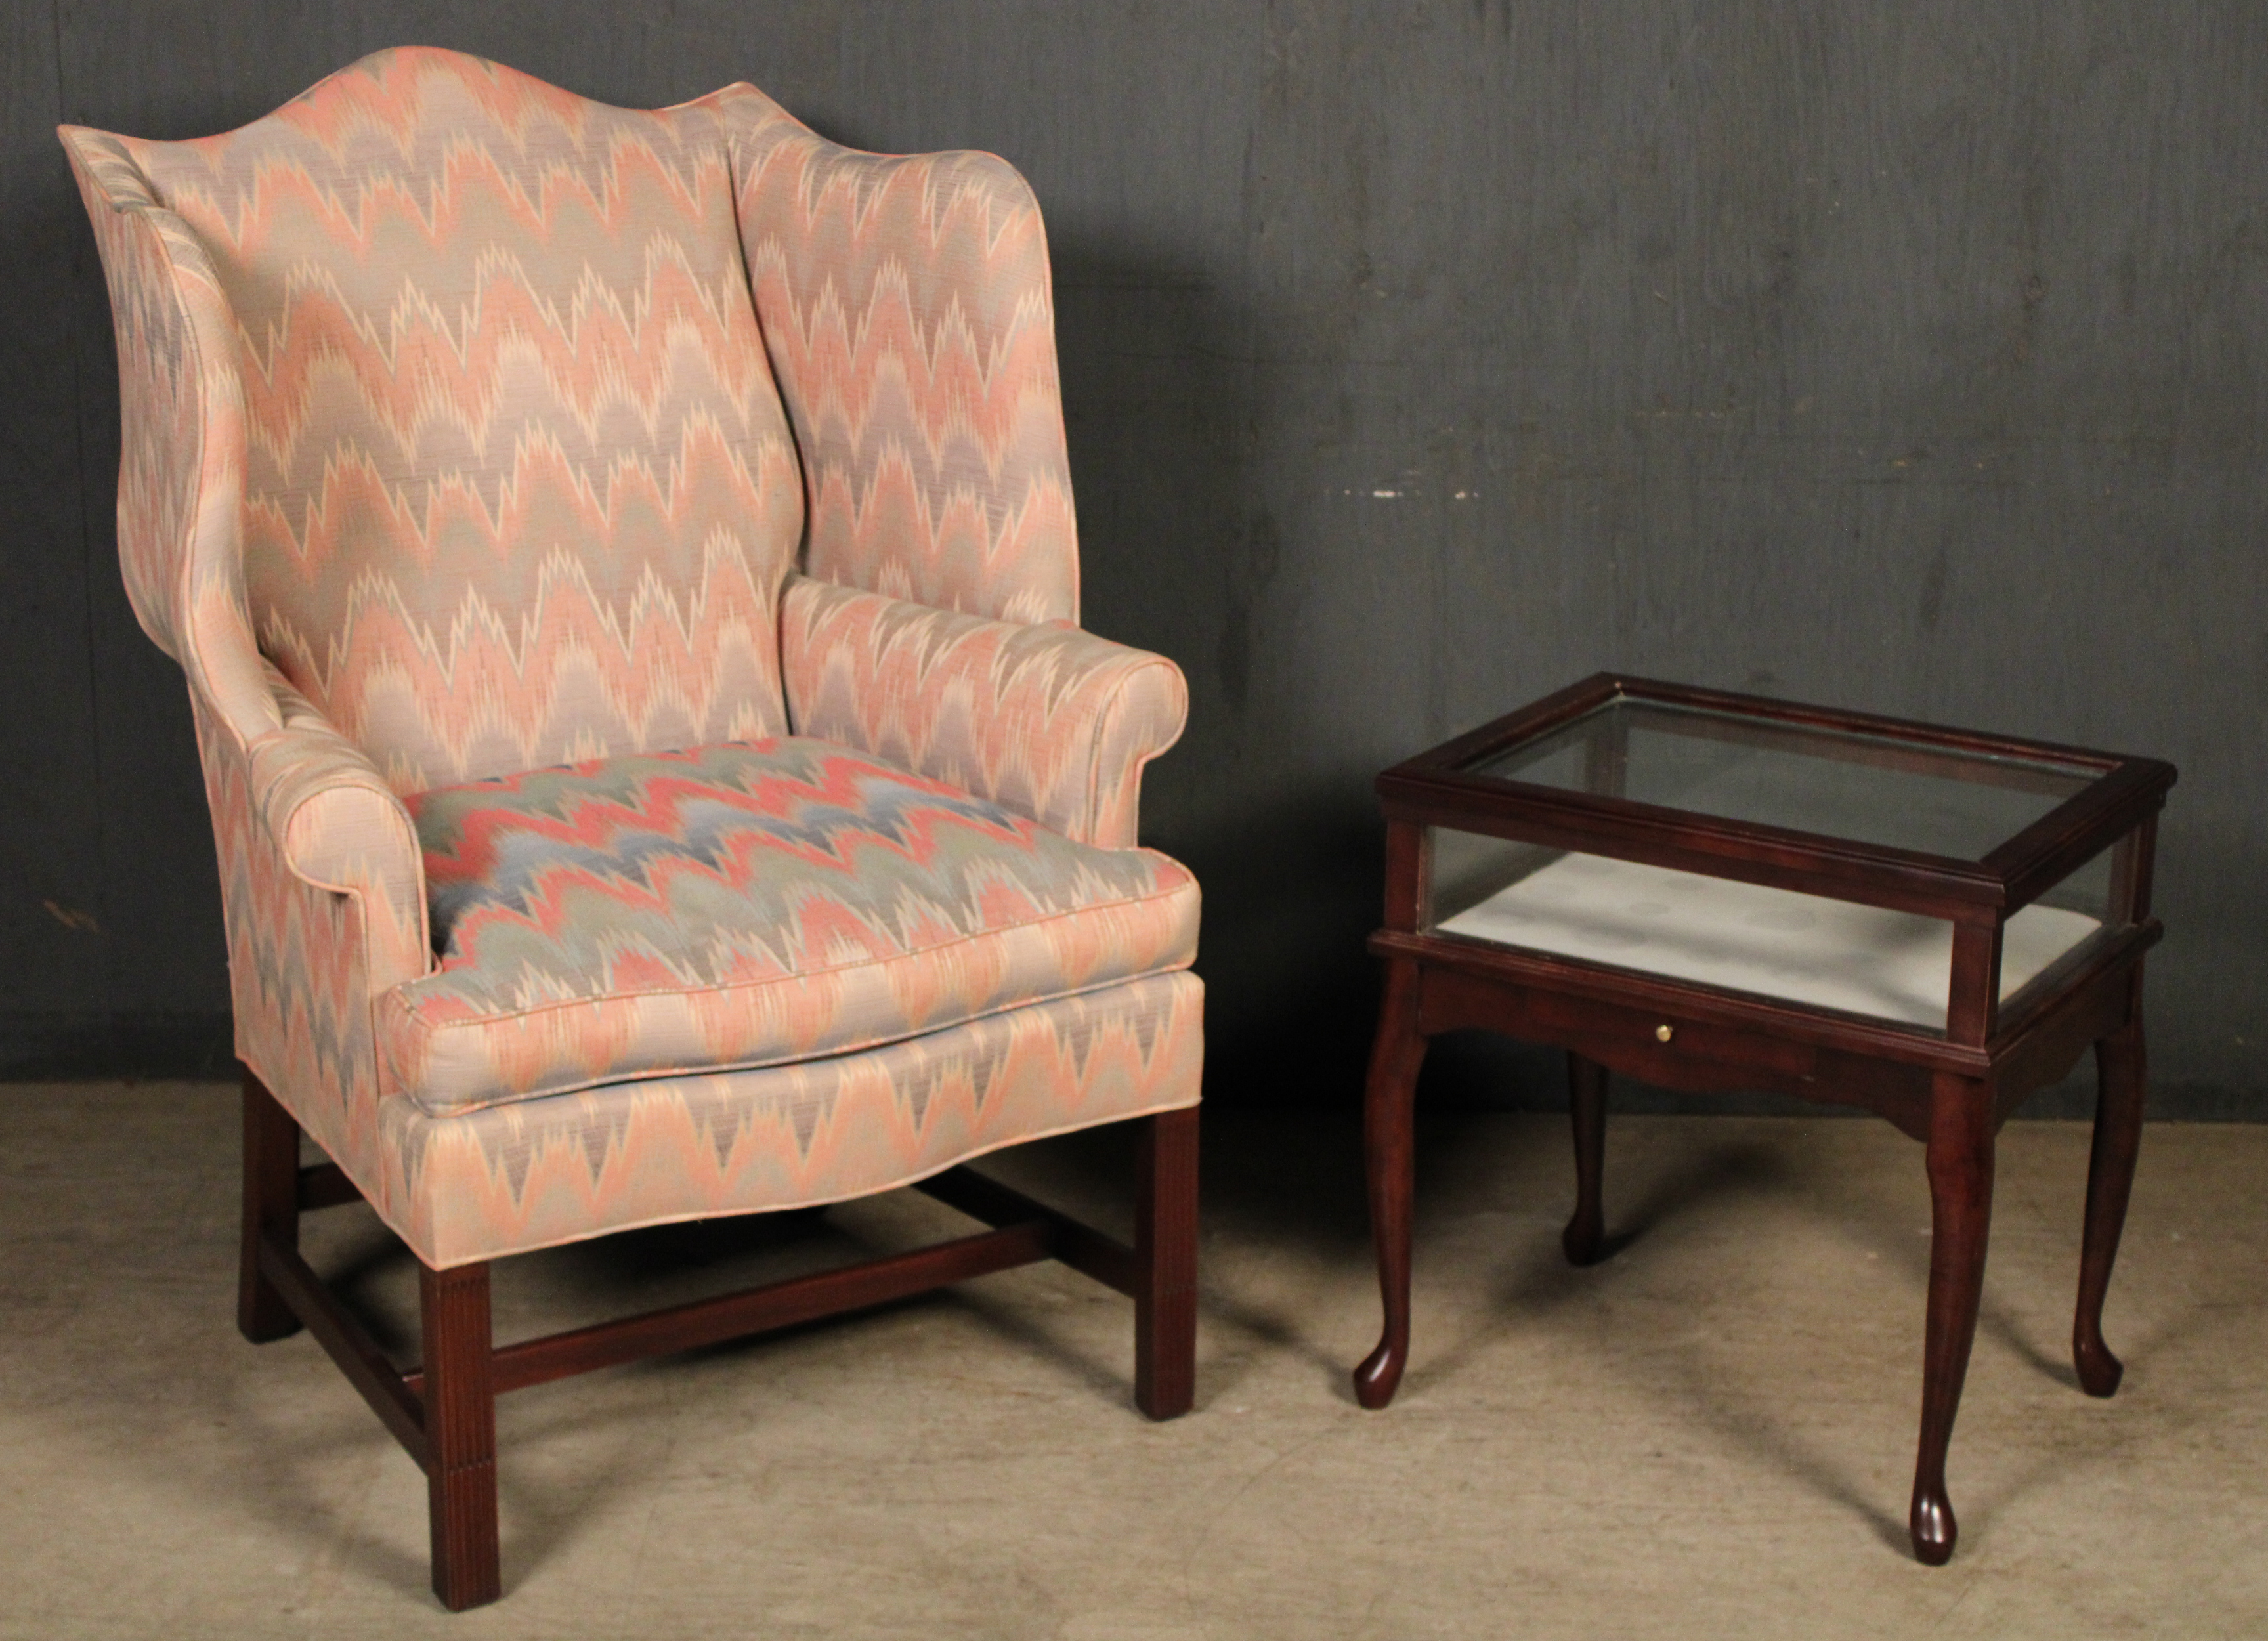 UPHOLSTERED WING CHAIR AND SPECIMEN